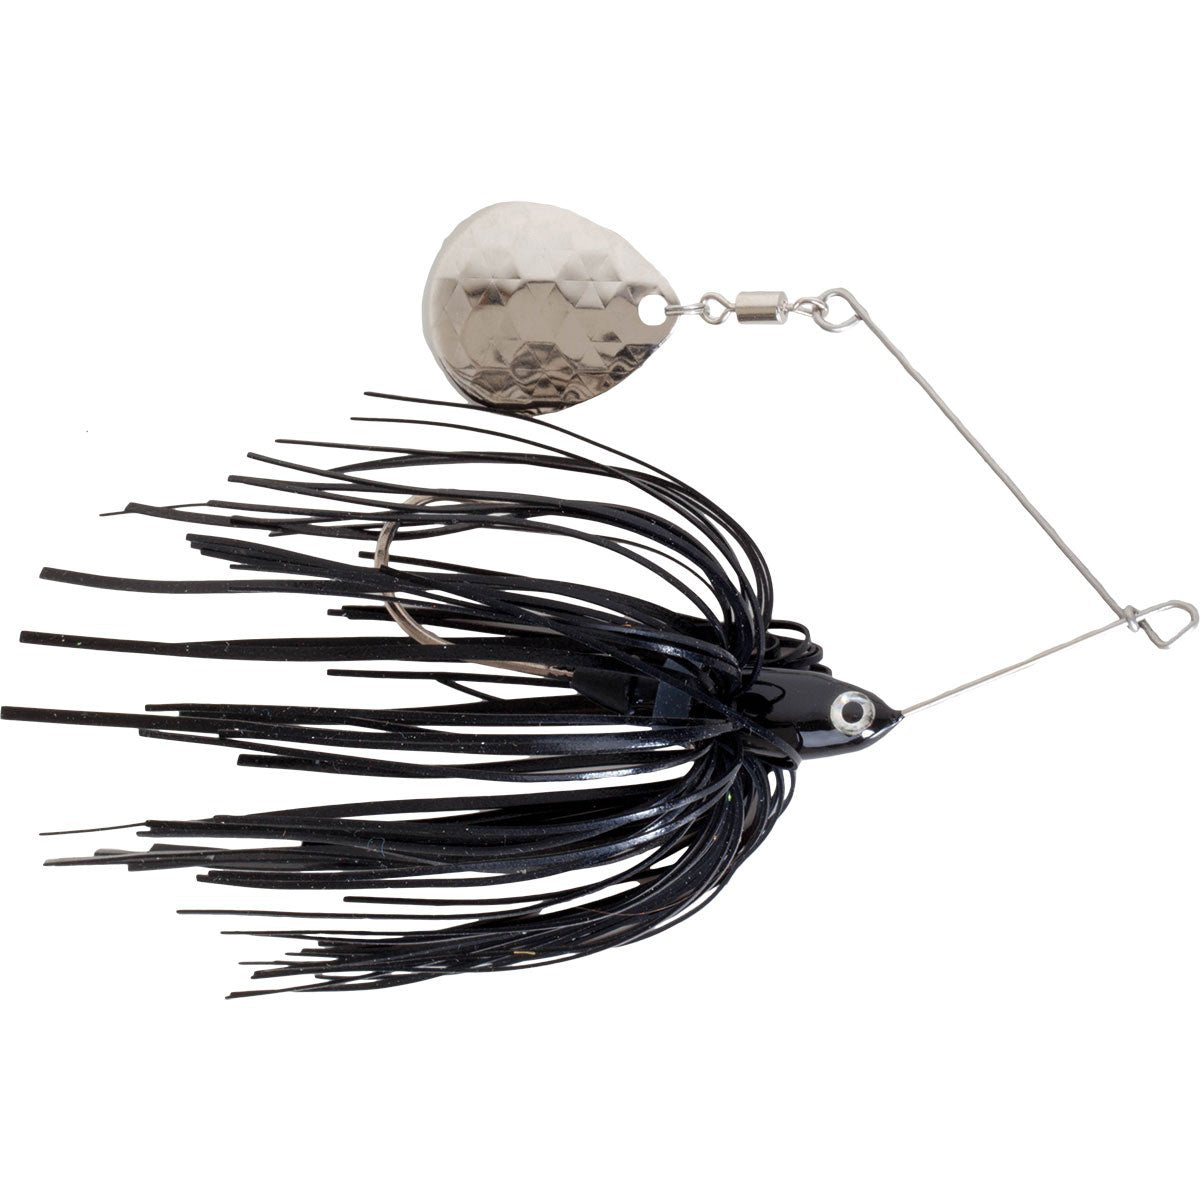  Warbaits SPINNERBAIT OG 1/2 OZ MB Secret Silver Blades : Beauty  & Personal Care